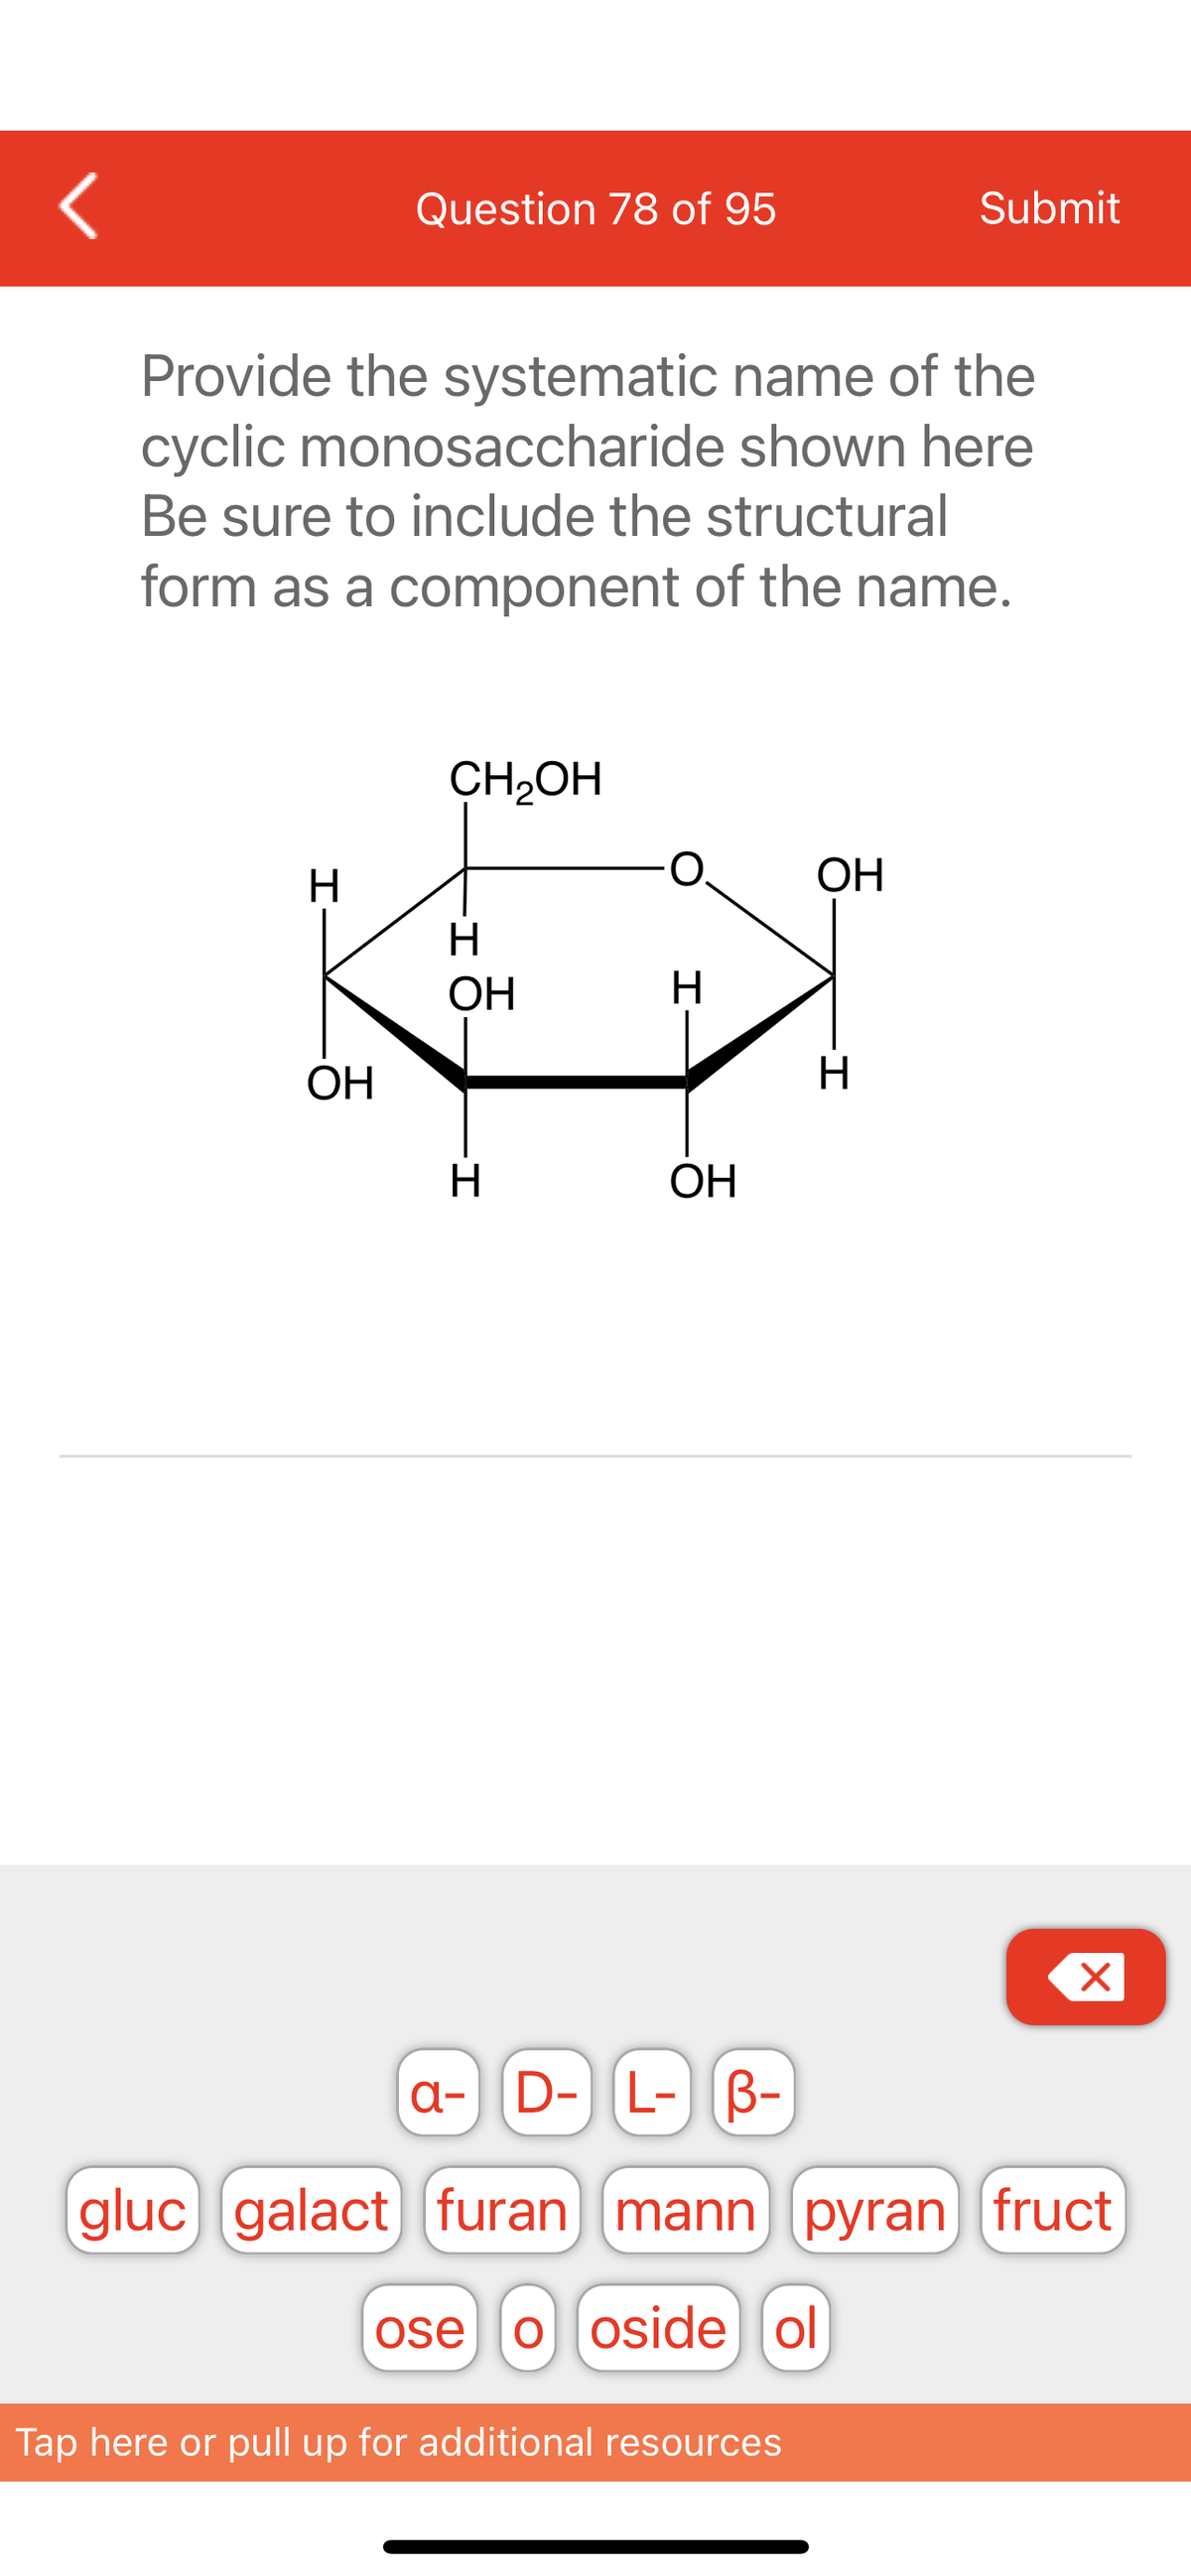 <
H
Question 78 of 95
Provide the systematic name of the
cyclic monosaccharide shown here
Be sure to include the structural
form as a component of the name.
OH
CH₂OH
H
ОН
-I
H
H
OH
ОН
Tap here or pull up for additional resources
Submit
H
X
a- D- L- B-
gluc galact) [furan mann (pyran fruct
ose ooside ol